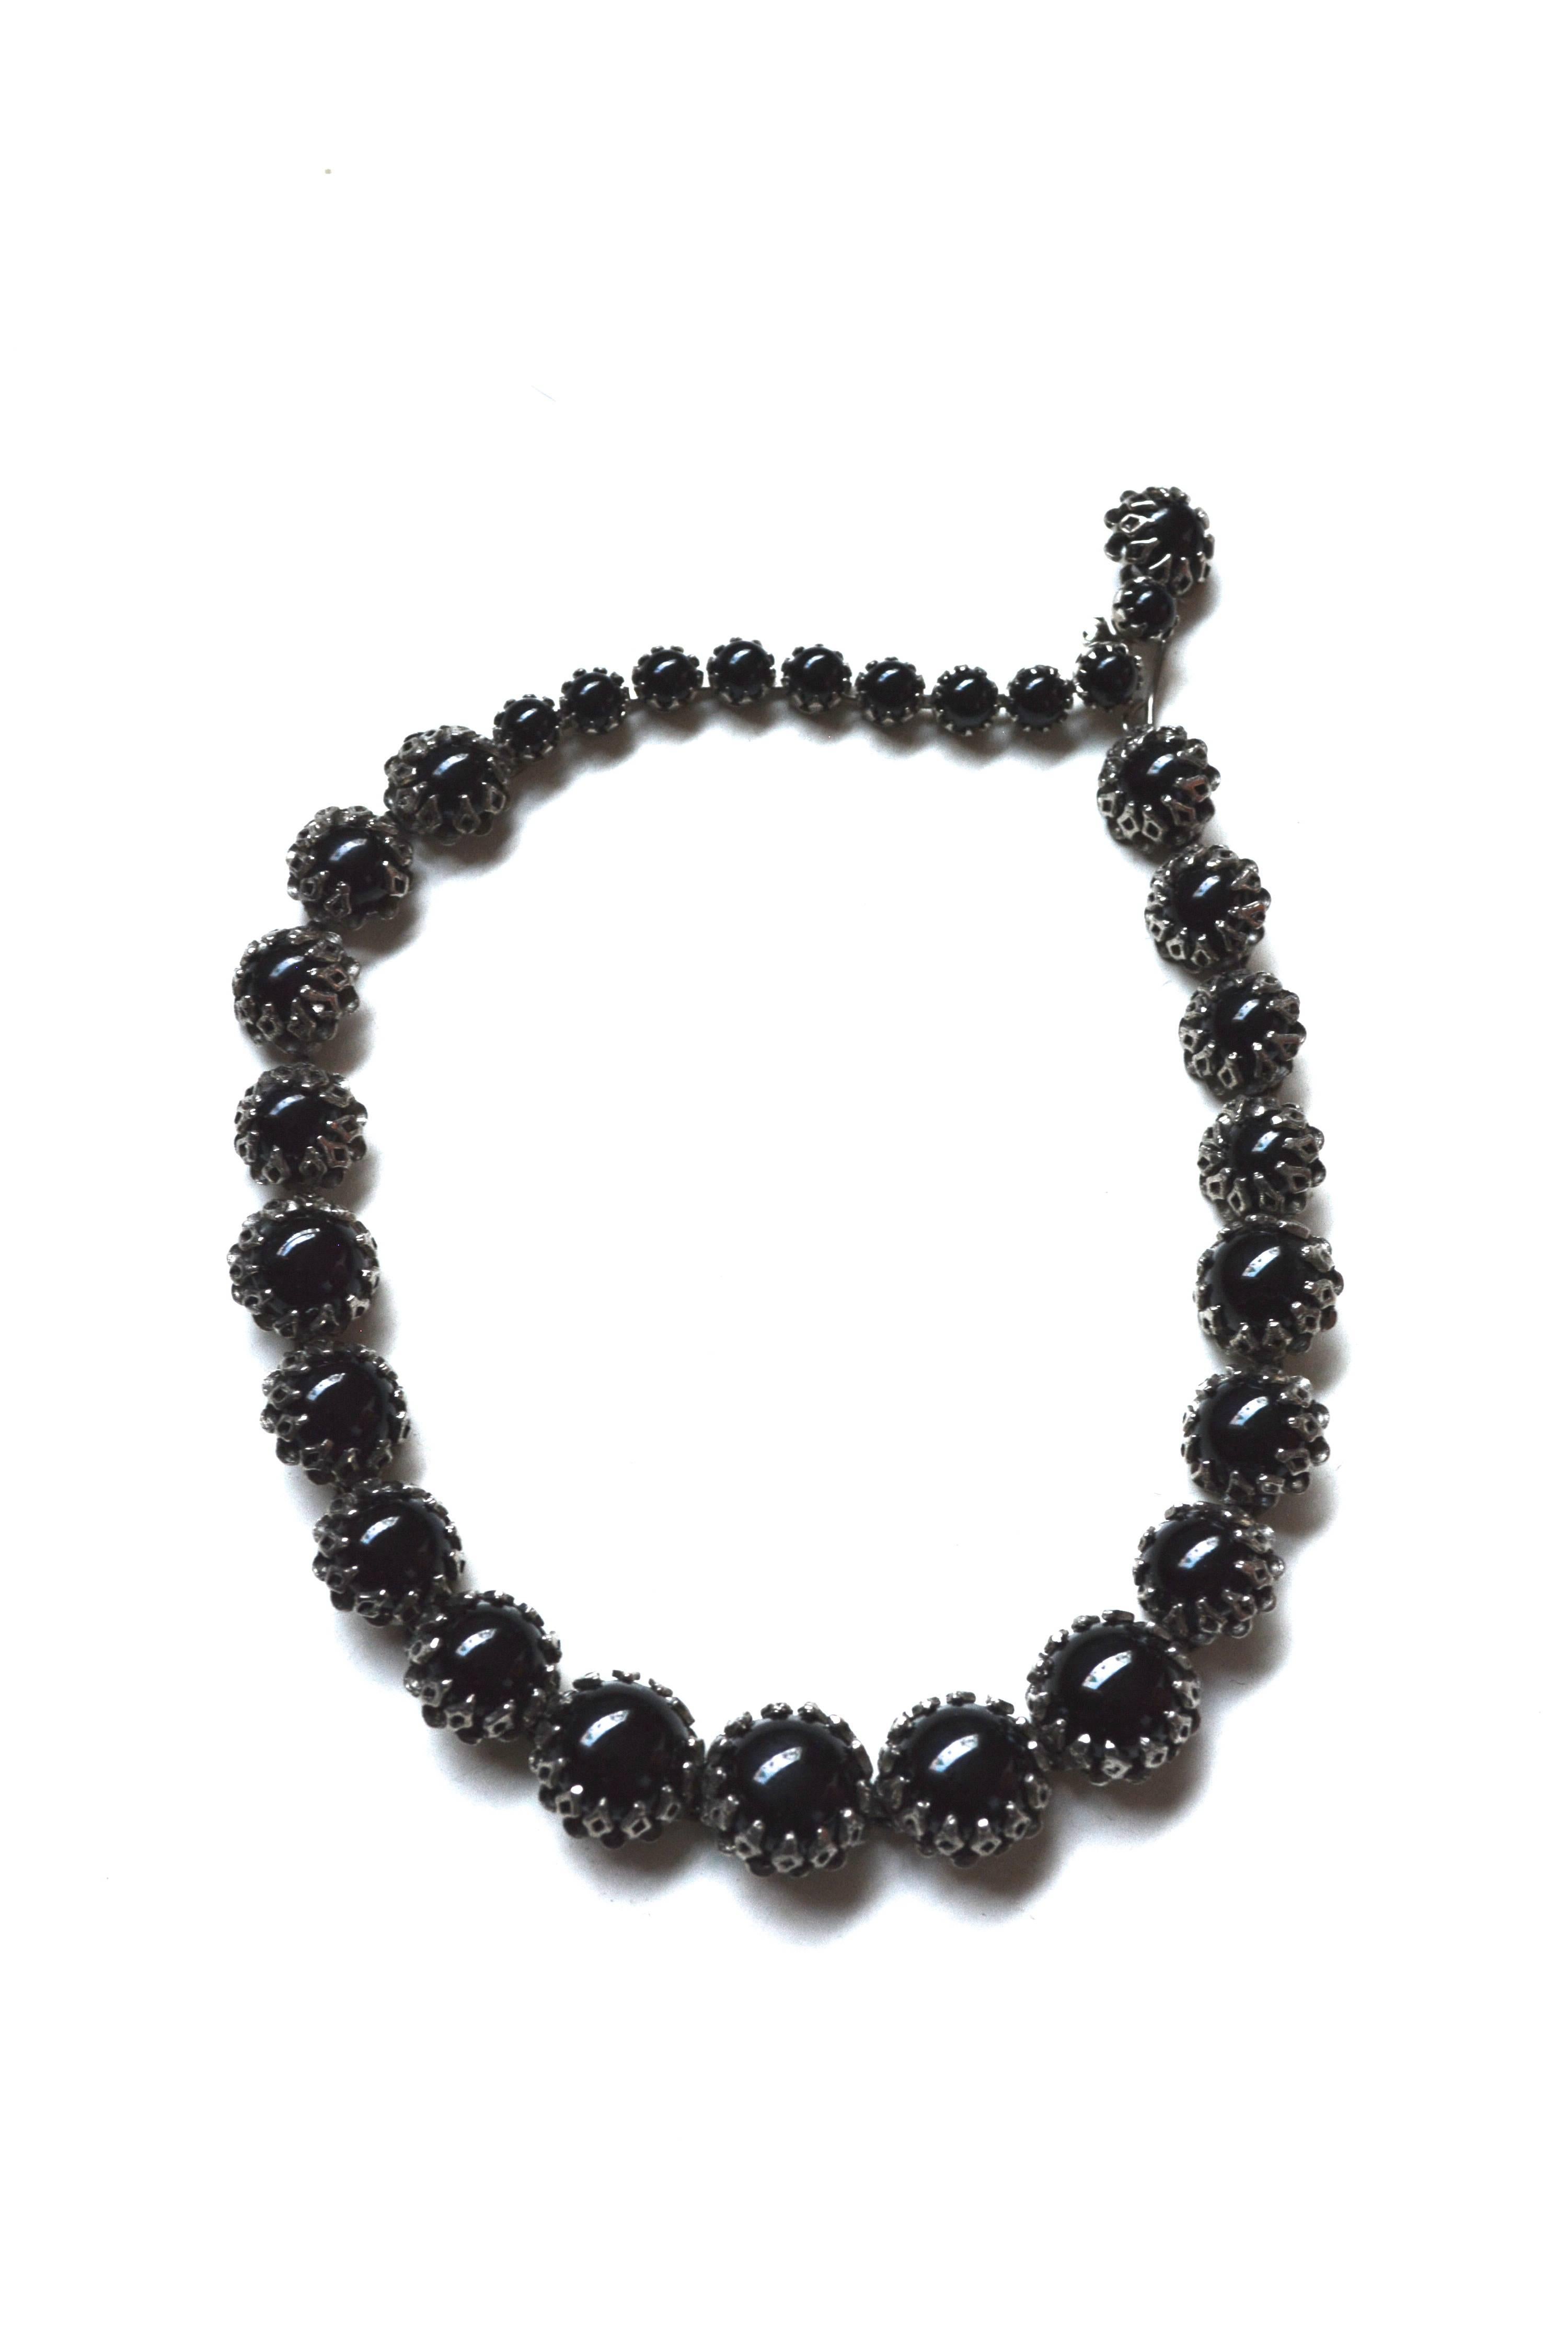 1950s-60s signed Christian Dior by Kramer black glass and silver metal choker. True choker style at a max length of 15